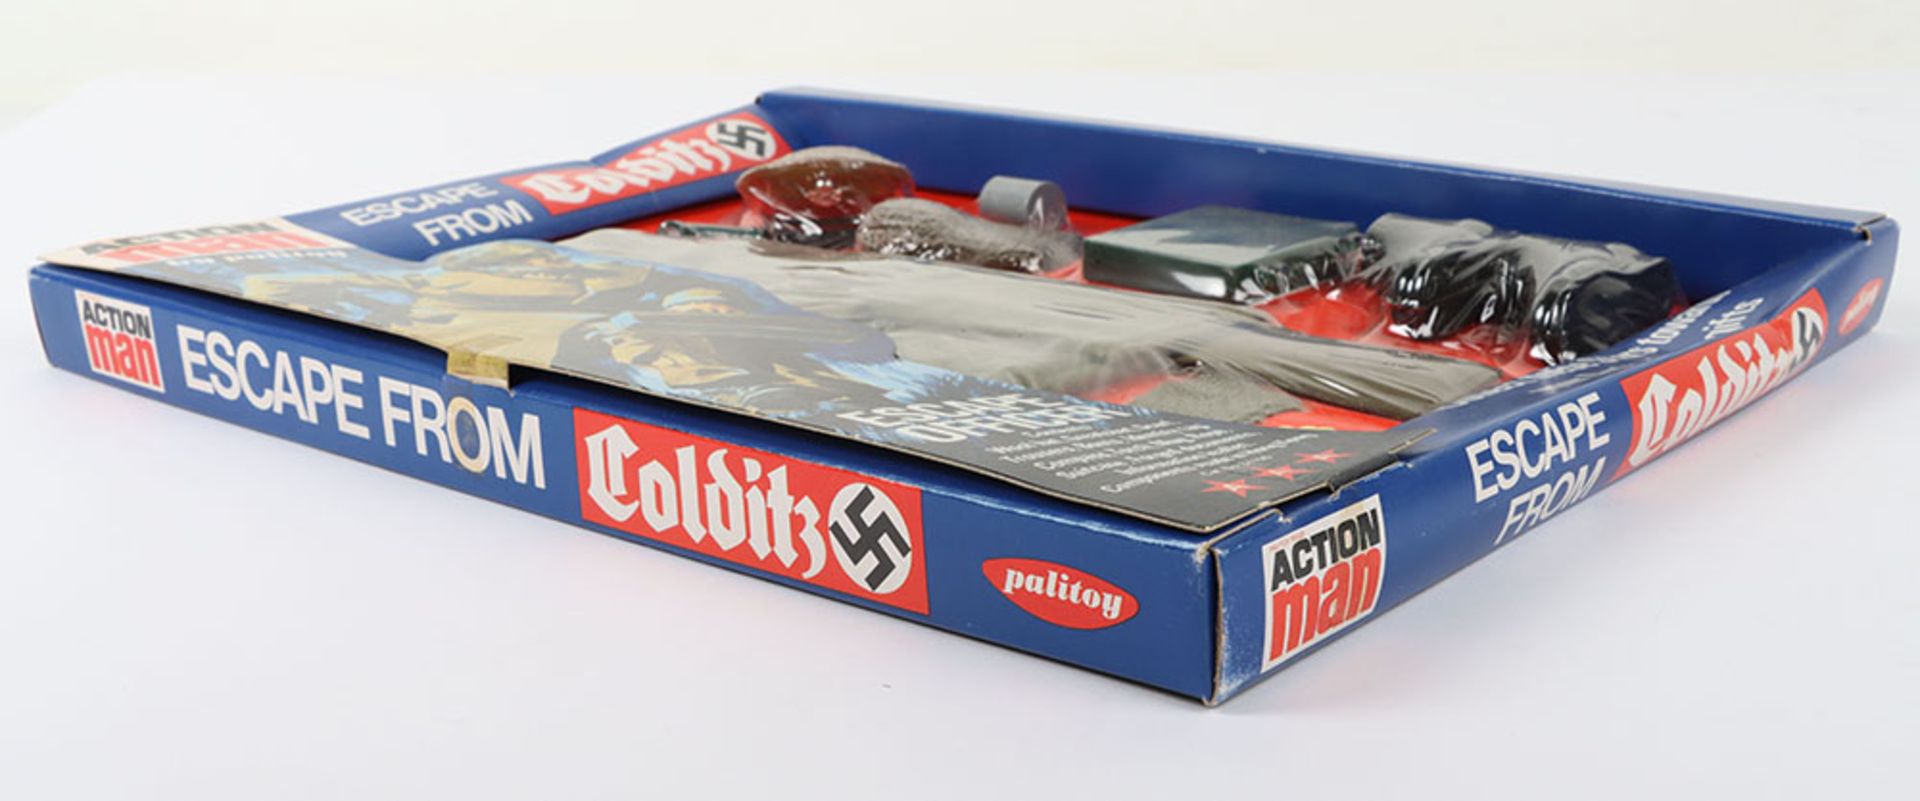 Palitoy Action Man Escape From Colditz Escape Officer circa 1970 - Image 4 of 4